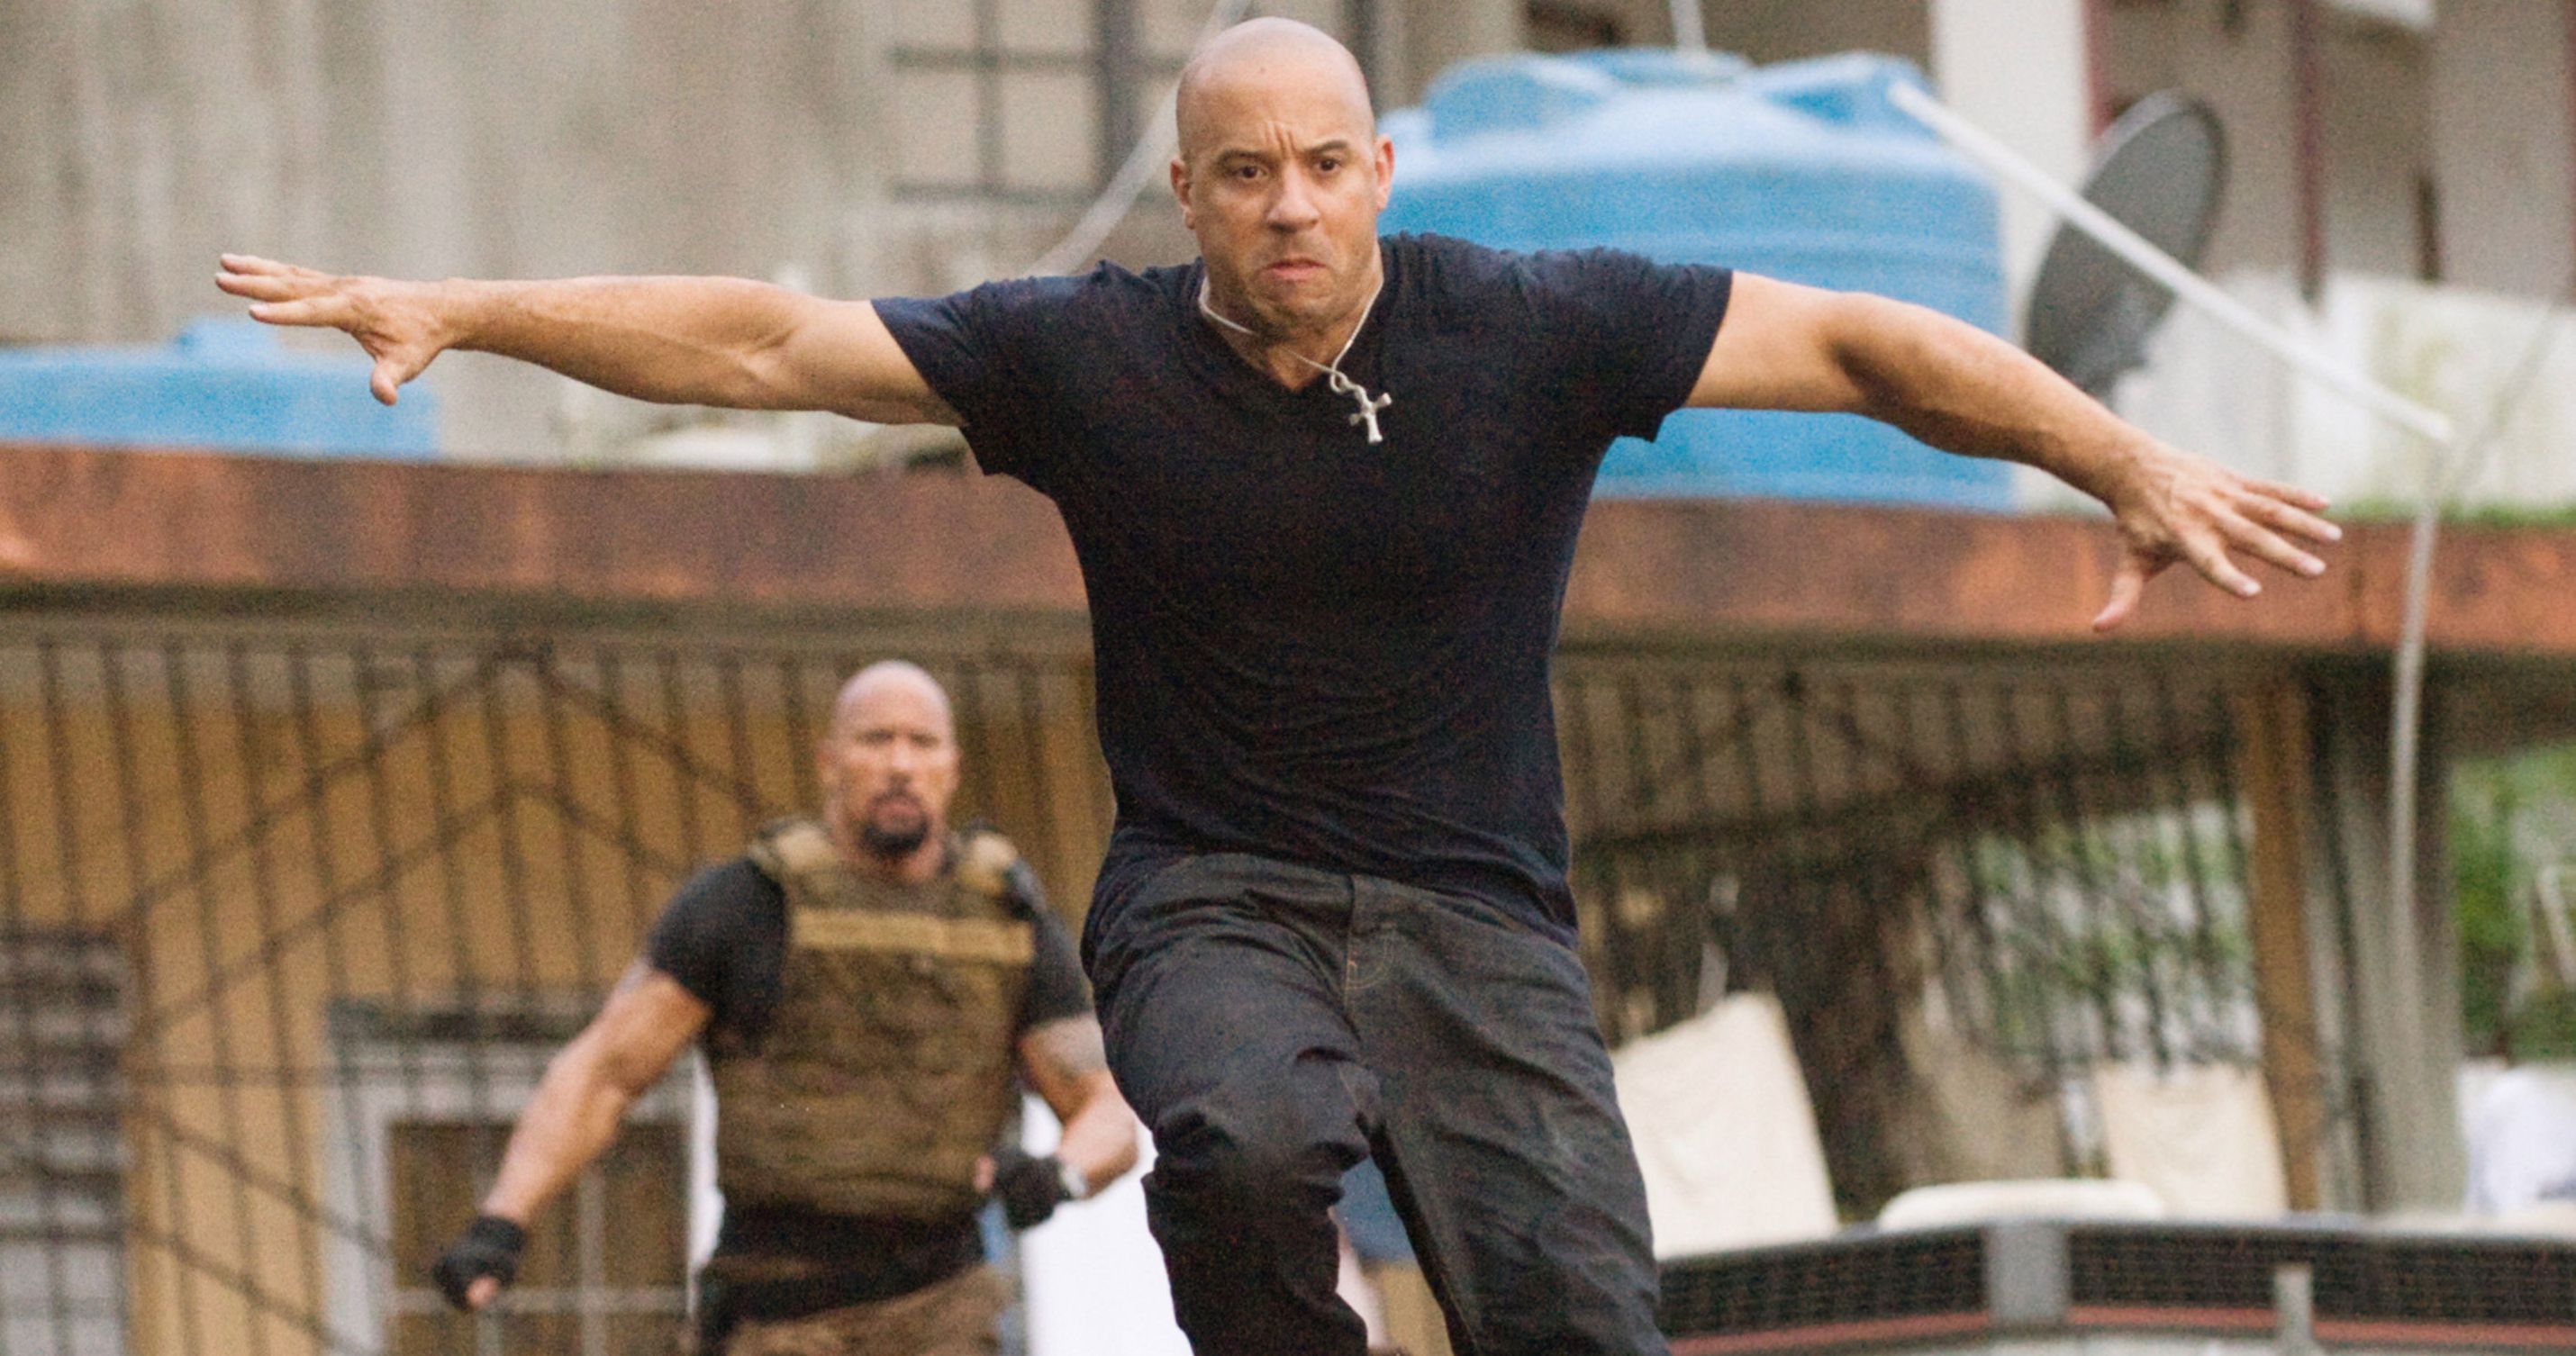 Fast &amp; Furious 9 Stuntman Moved from ICU Following On-Set Injury